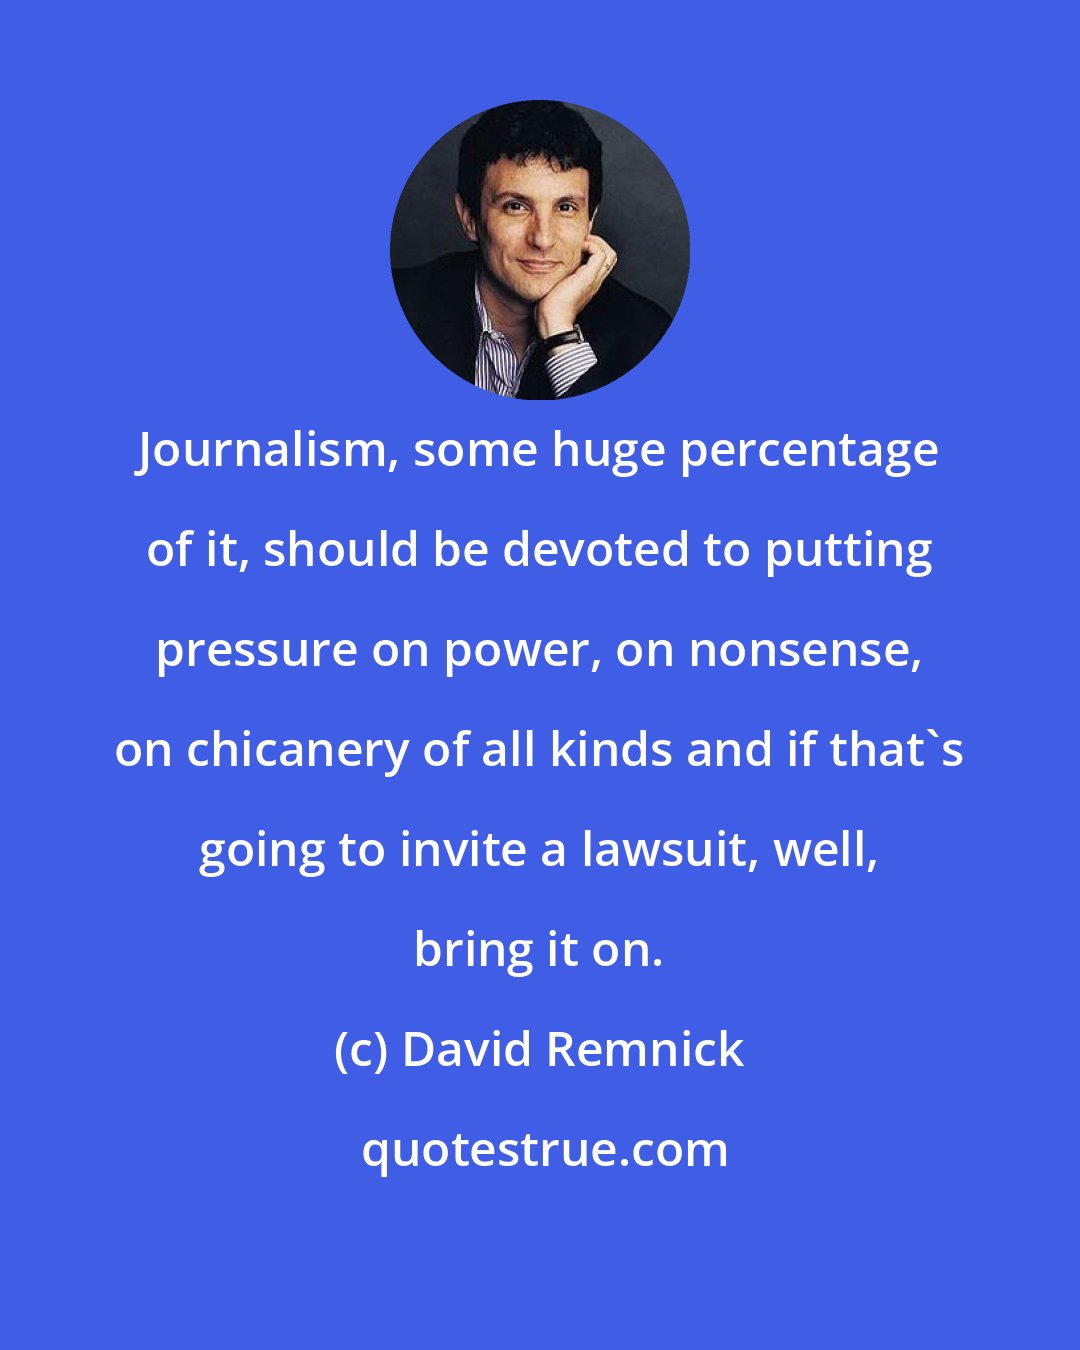 David Remnick: Journalism, some huge percentage of it, should be devoted to putting pressure on power, on nonsense, on chicanery of all kinds and if that's going to invite a lawsuit, well, bring it on.